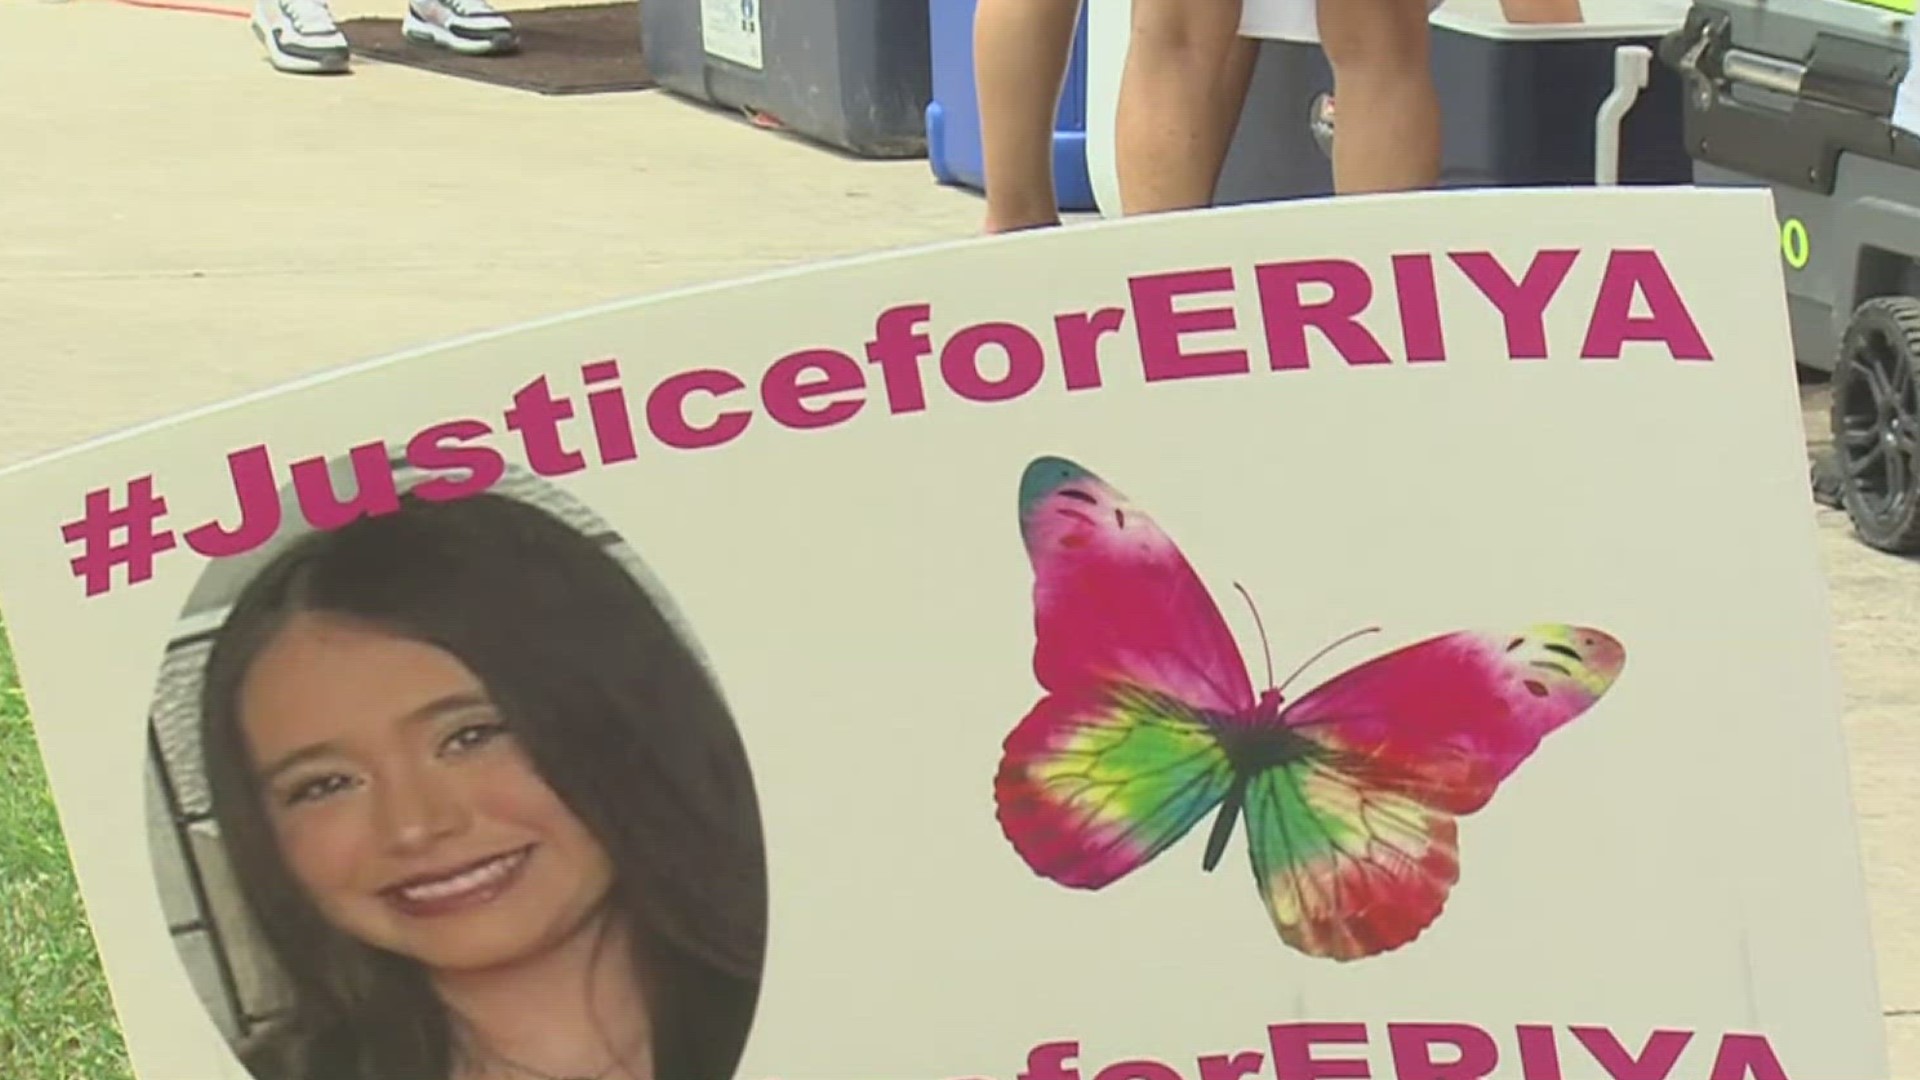 Organizers of the benefit said 100-percent of proceeds will be going straight to Eriya's family.